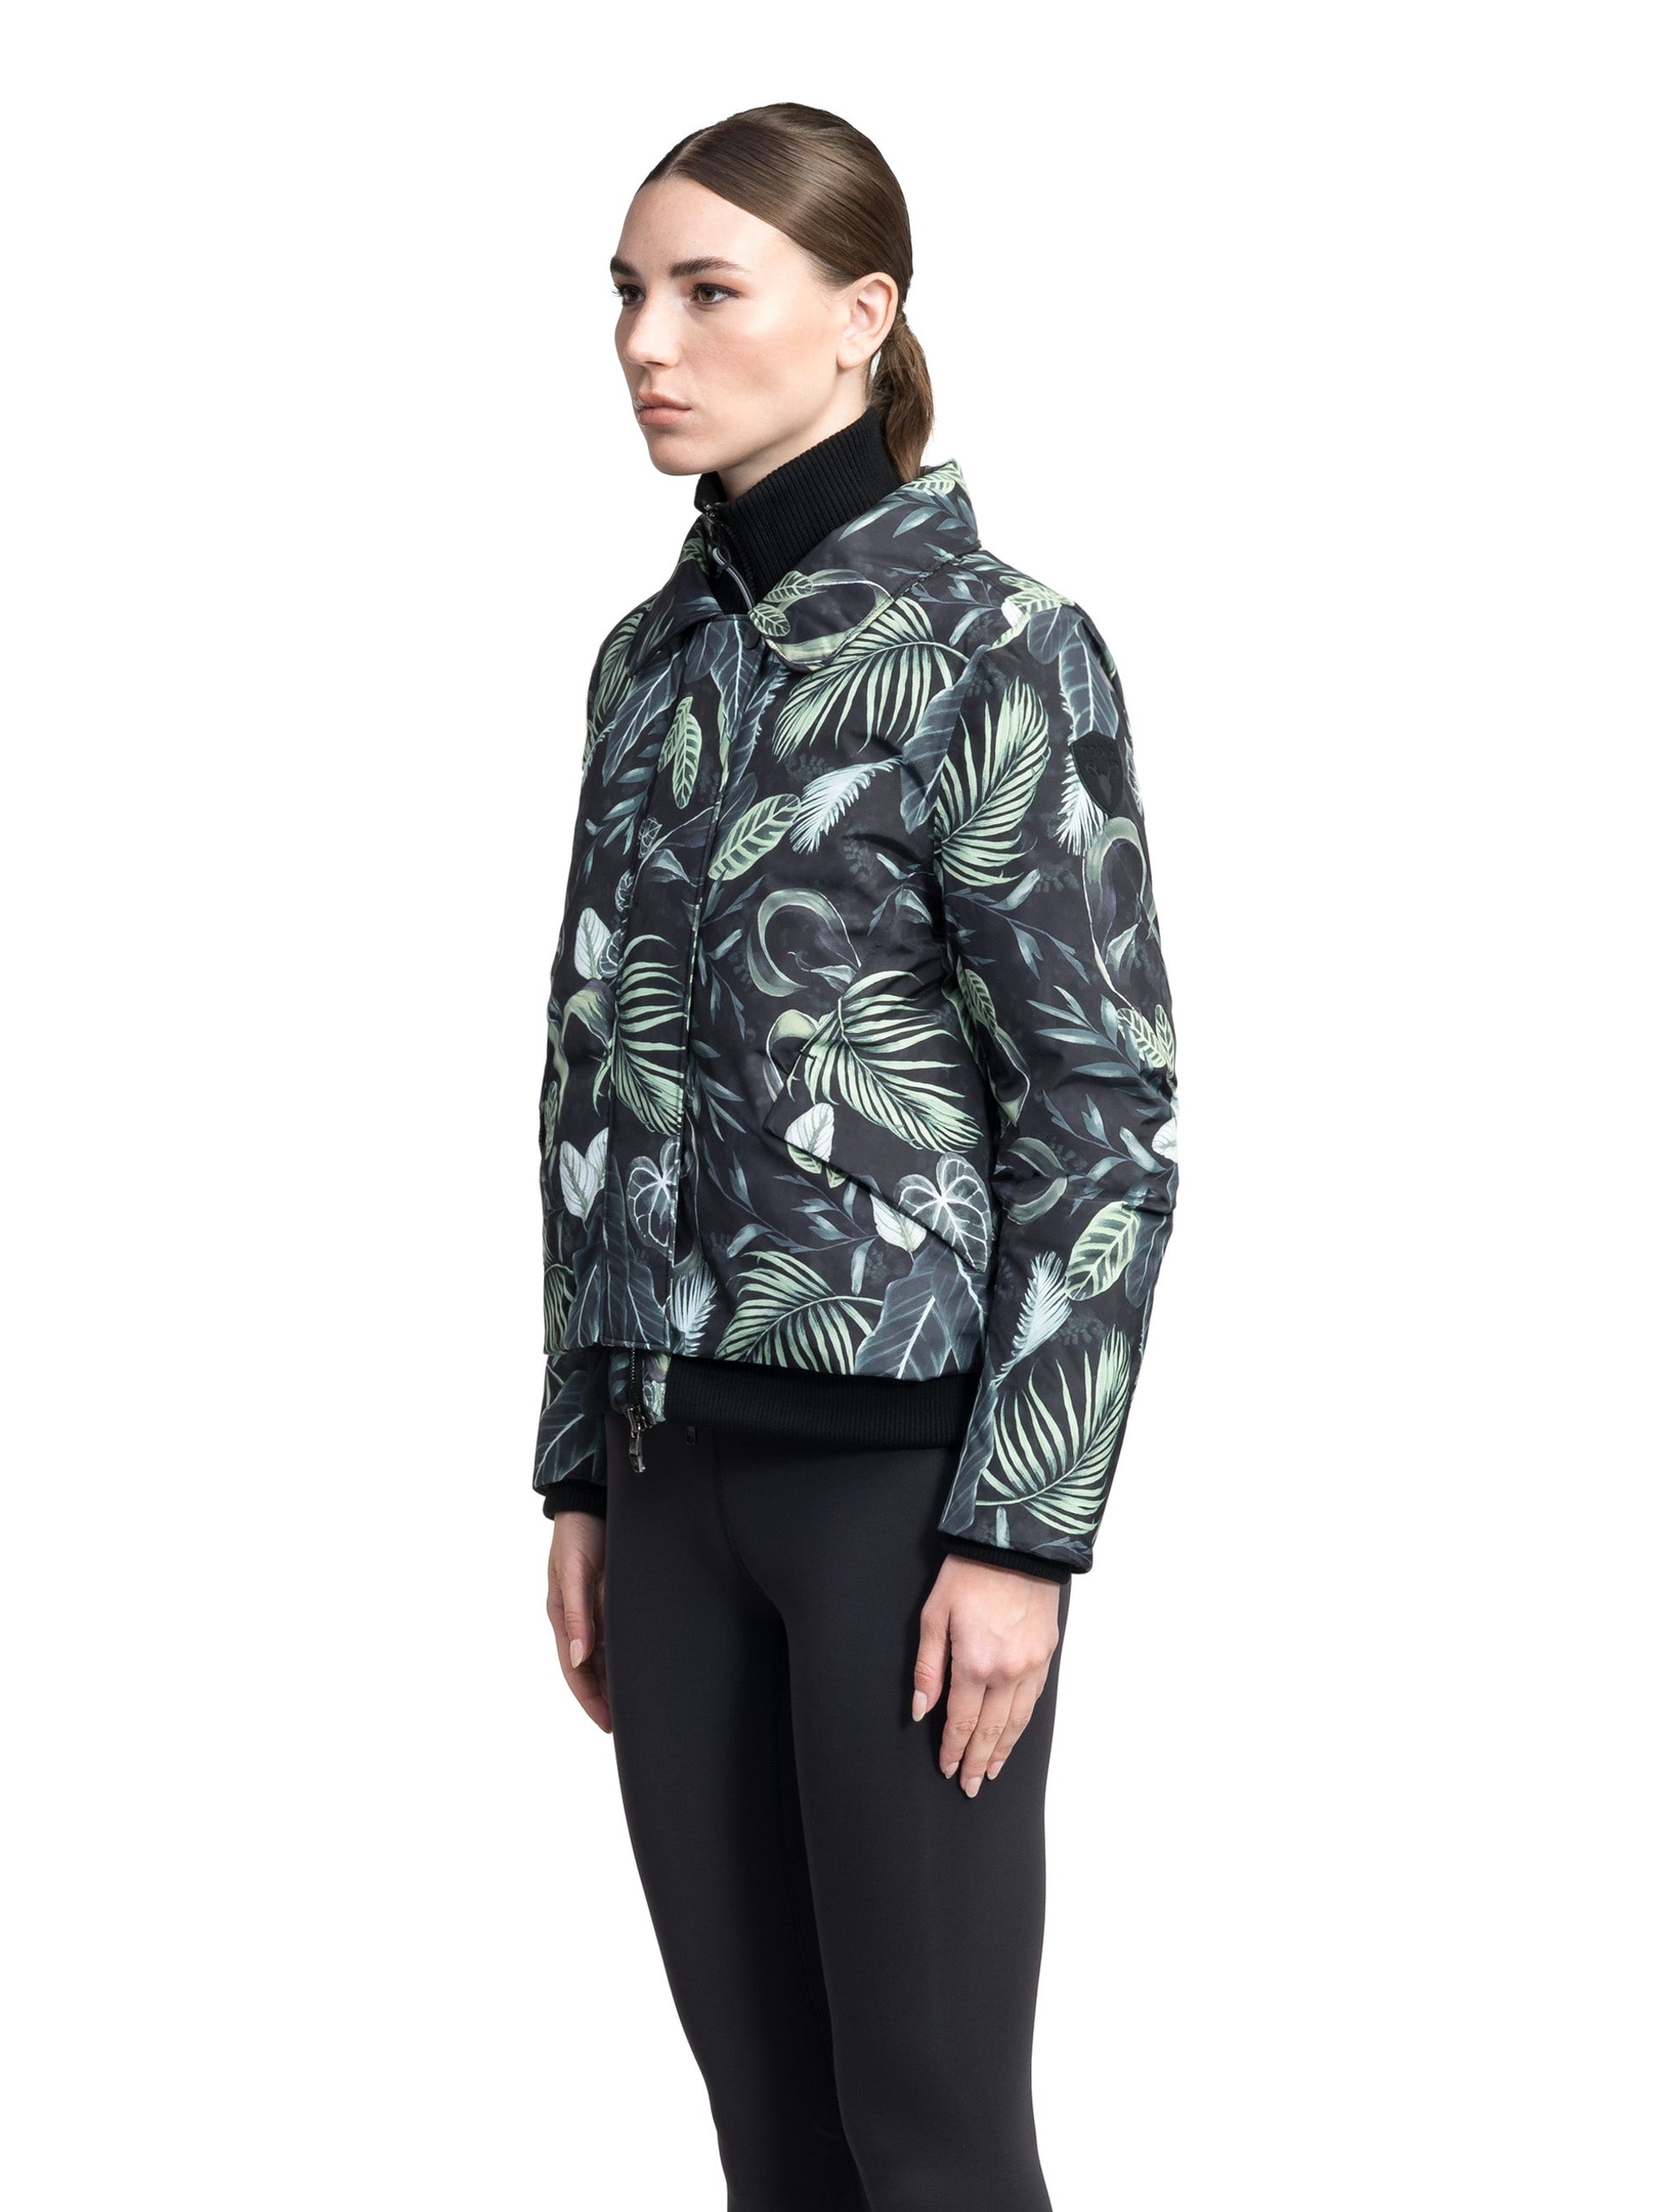 Rae Ladies Aviator Jacket in hip length, Canadian duck down insulation, removable shearling collar with hidden tuckable hood, and two-way front zipper, in Foliage